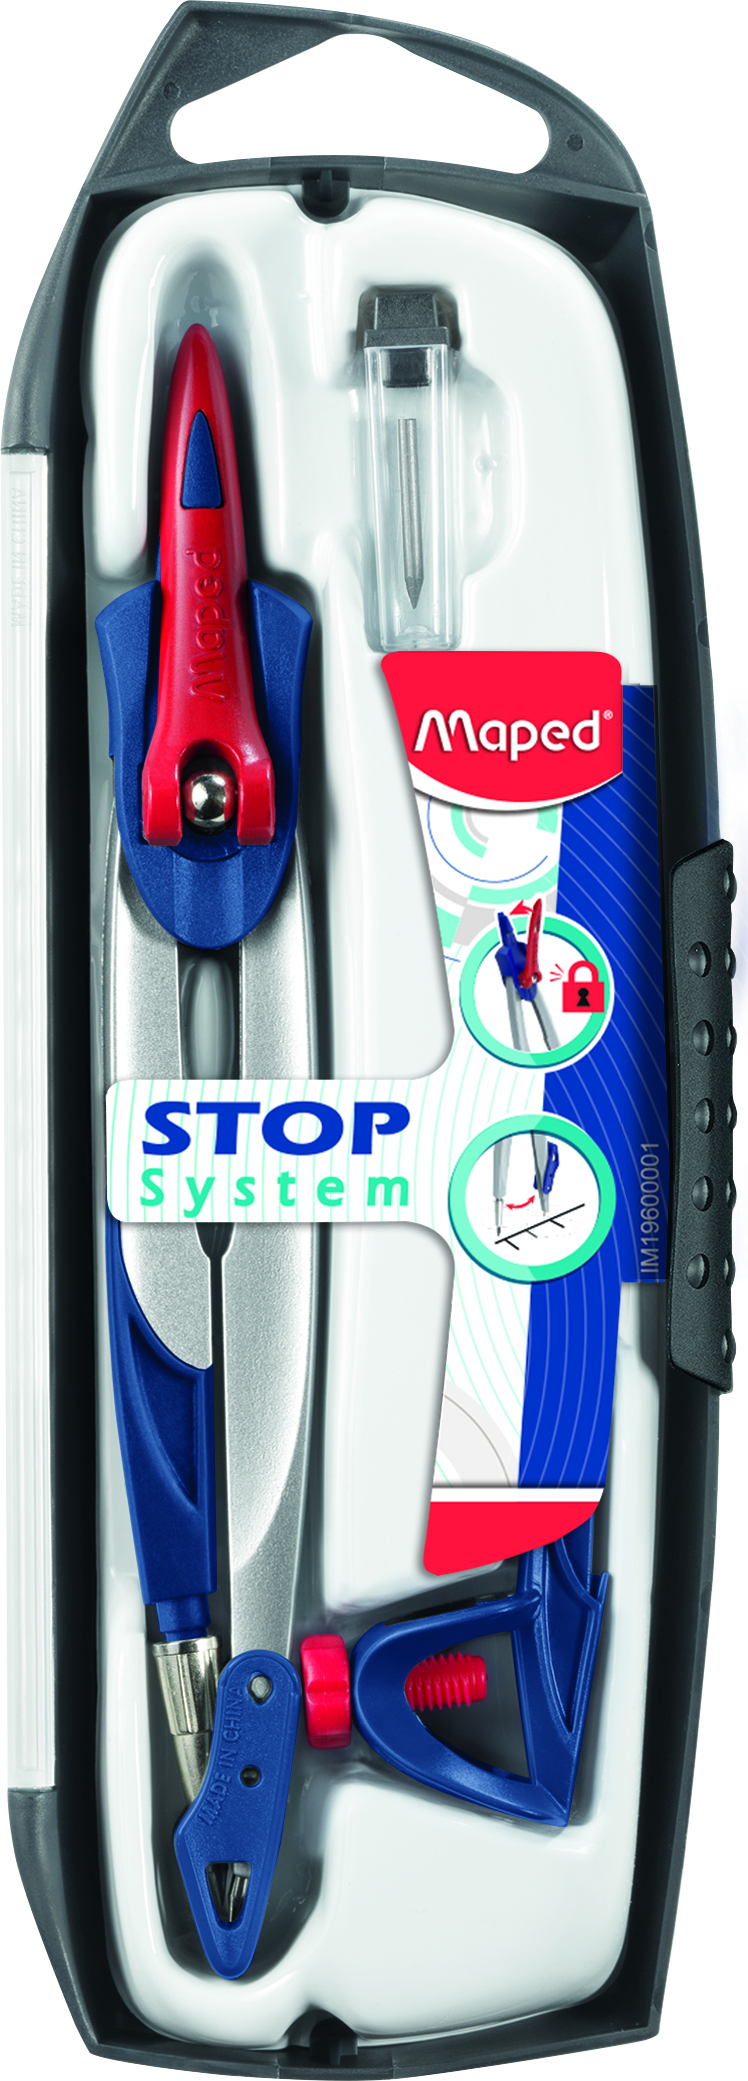 MAPED COMPASS STOP SYSTEM CASE 3P BOX 196100